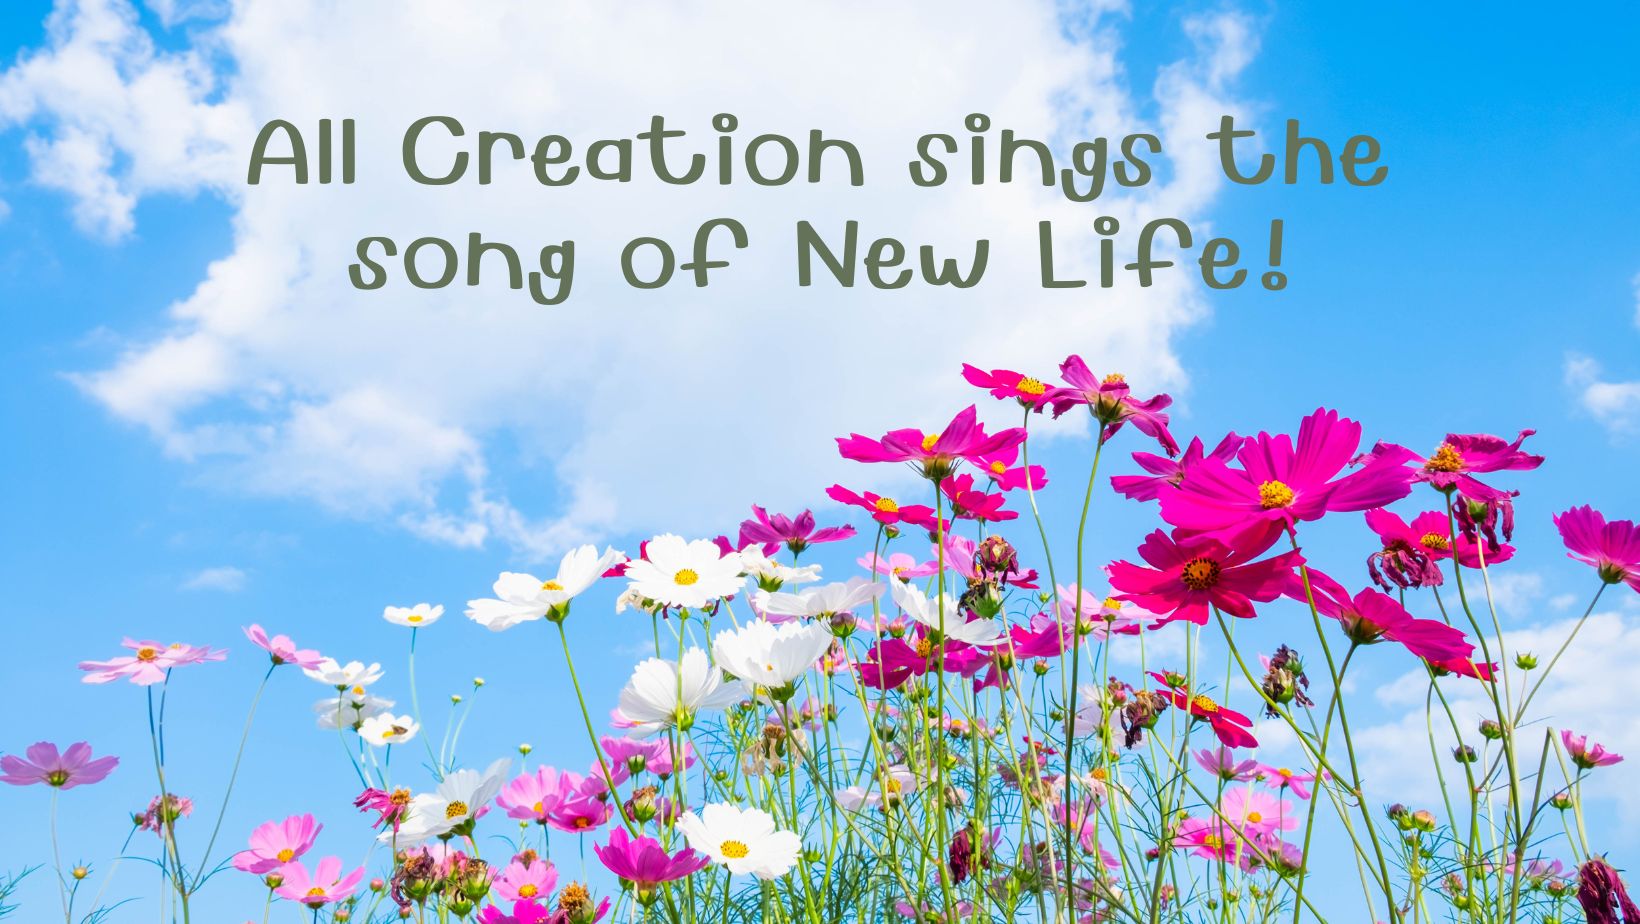 All-Creation-sings-the-song-of-New-Life